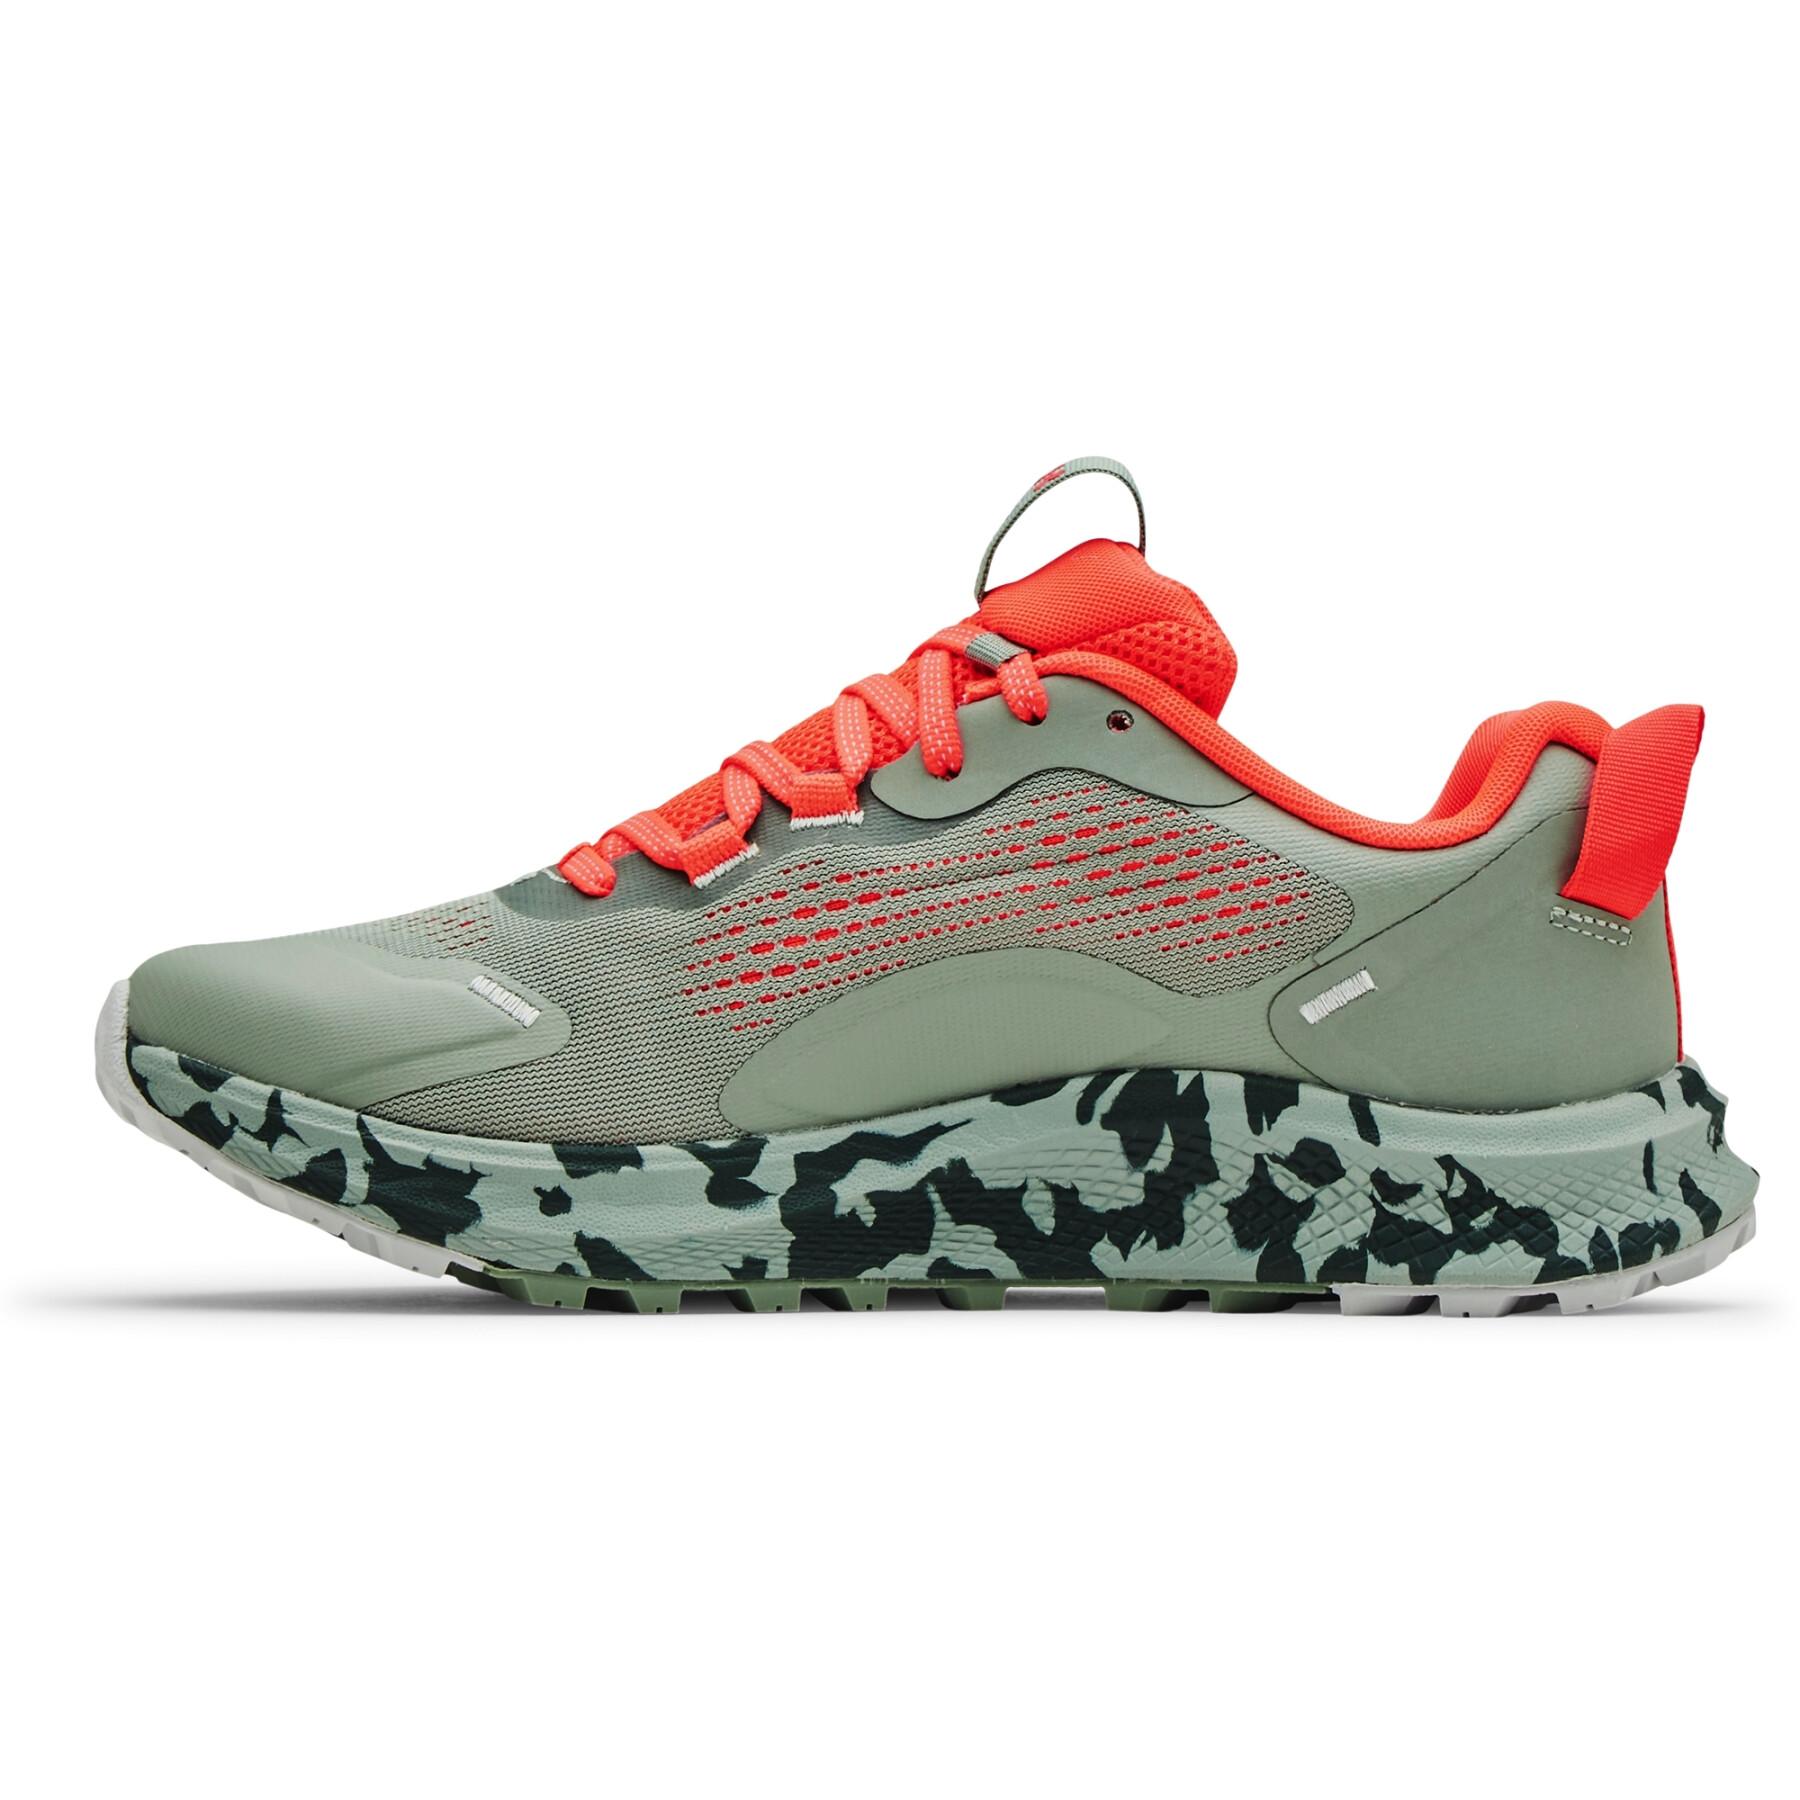 Zapatillas de running para mujer Under Armour Charged Bandit TR2